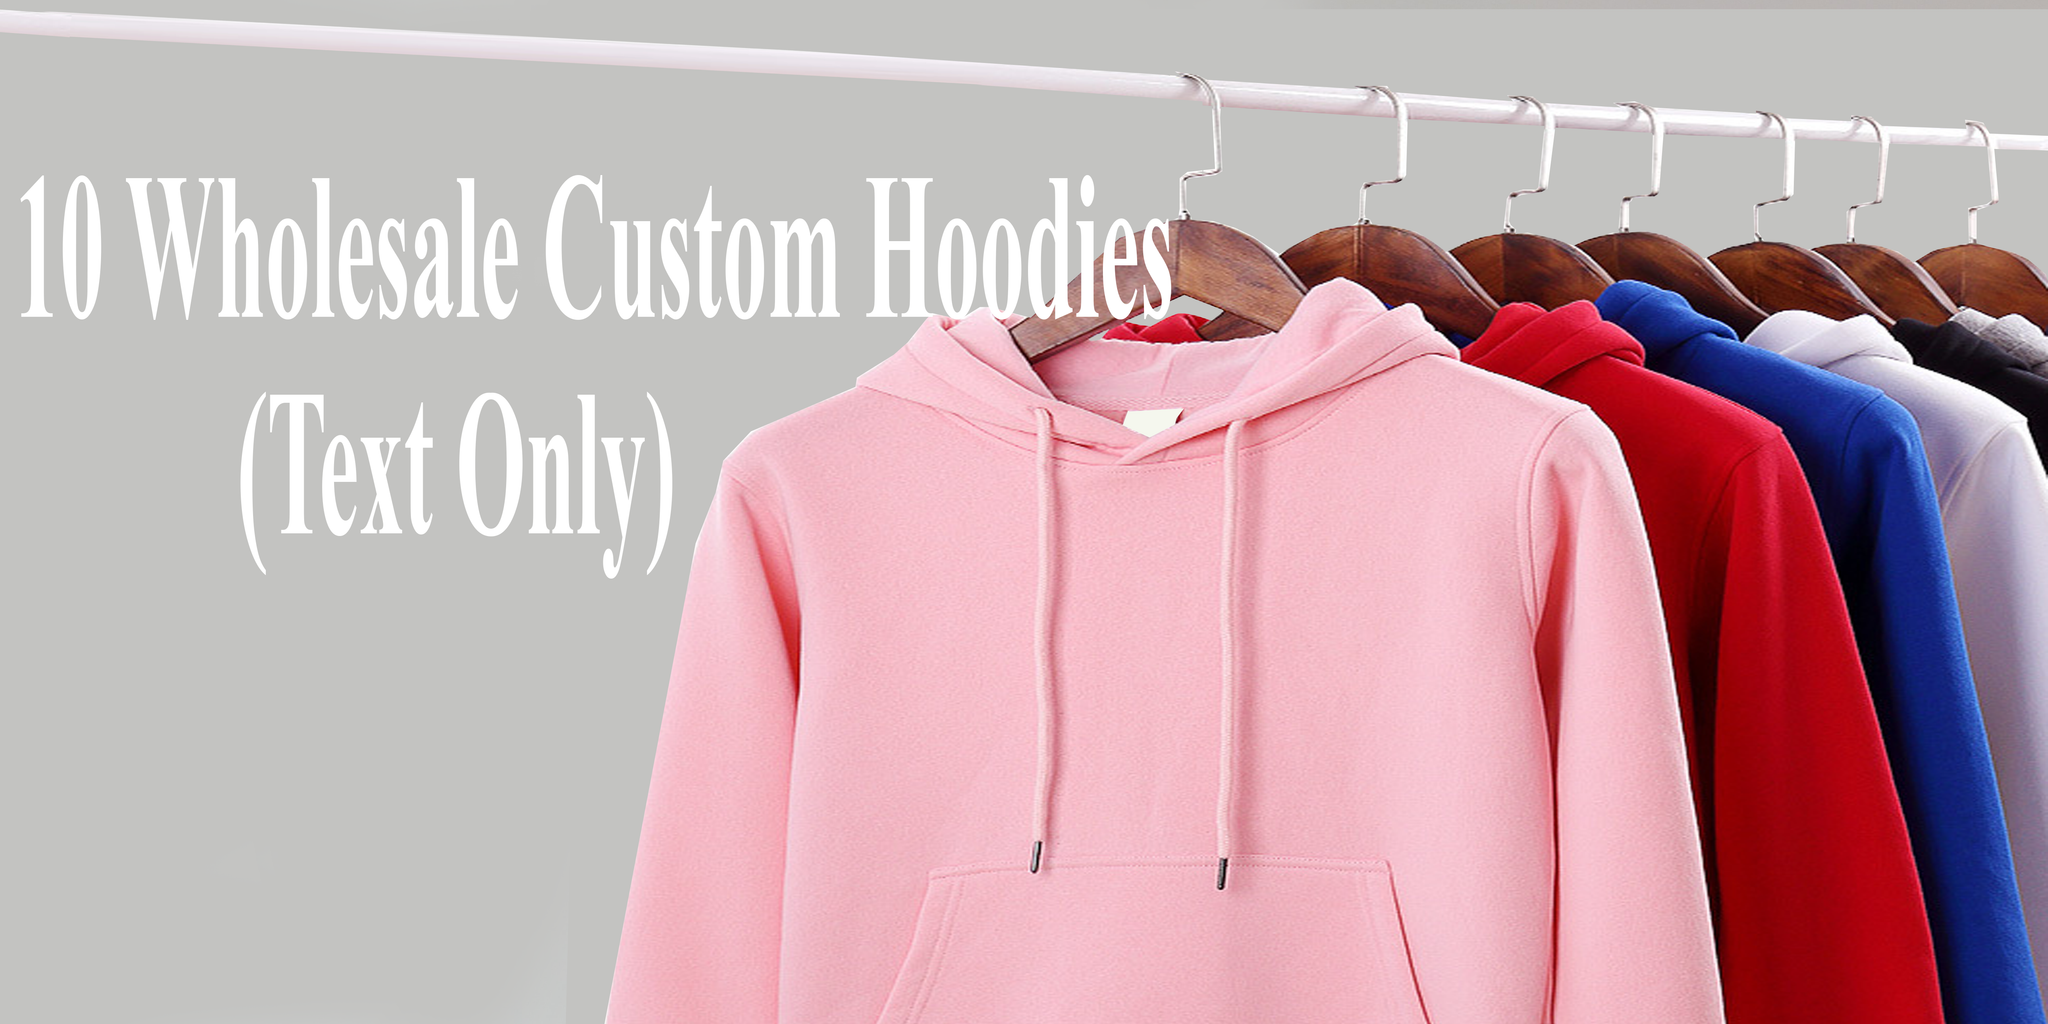 10 Wholesale Custom Hoodies (Text Only)